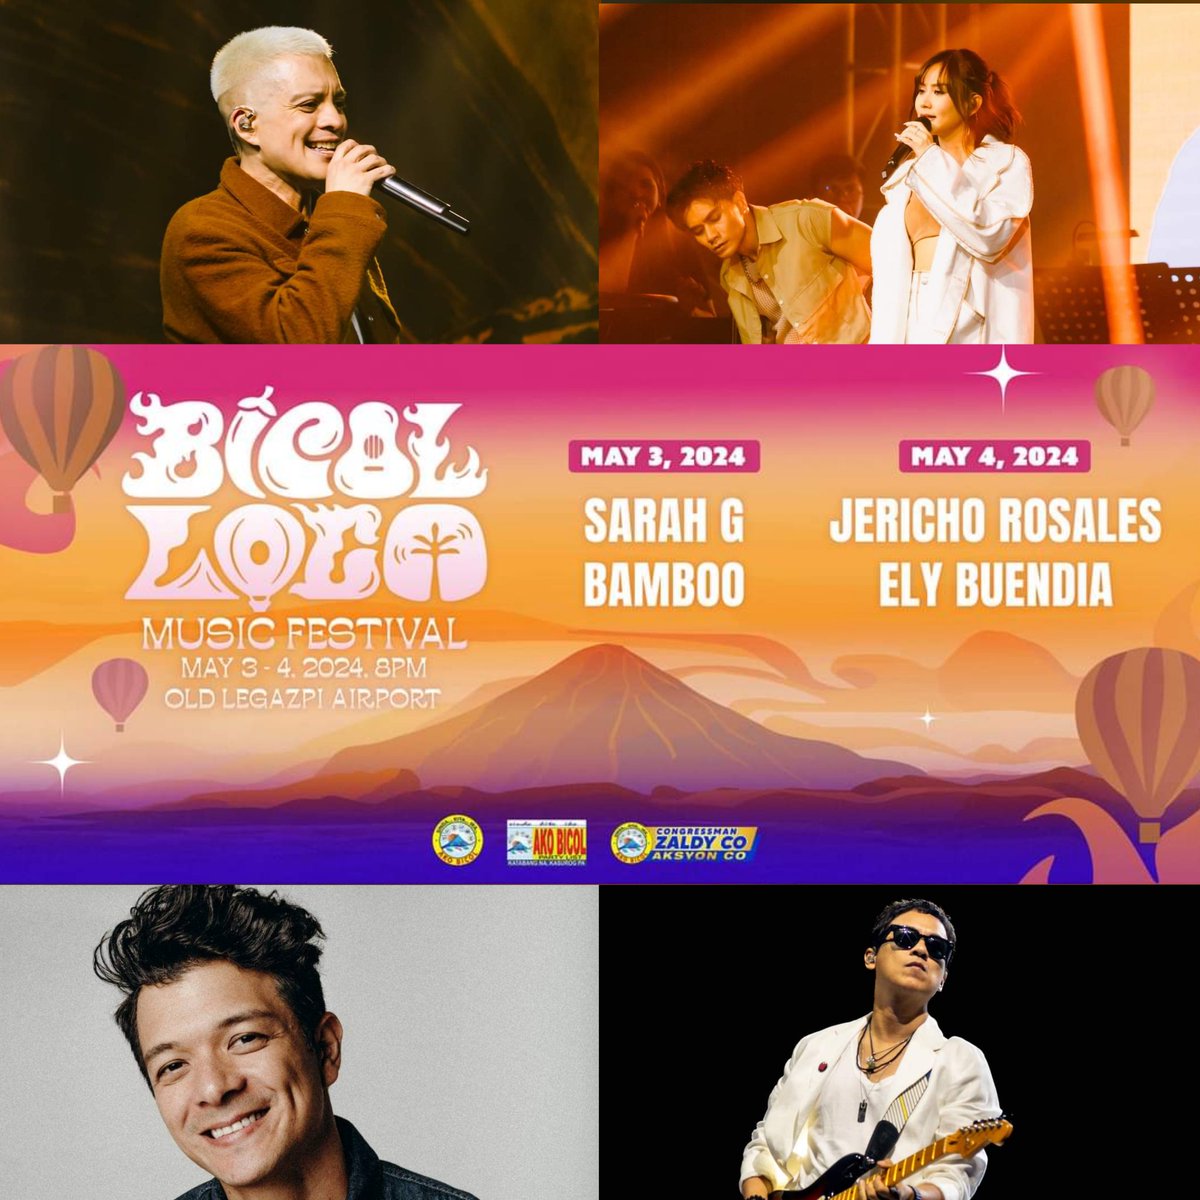 The Bicol Loco Festival in Albay promises to captivate visitors with unparalleled views and a sense of adventure with special performances by Sarah Geronimo, Bamboo, Ely Buendia, and Jericho Rosales. Read more: philippineconcerts.com/music-festival…